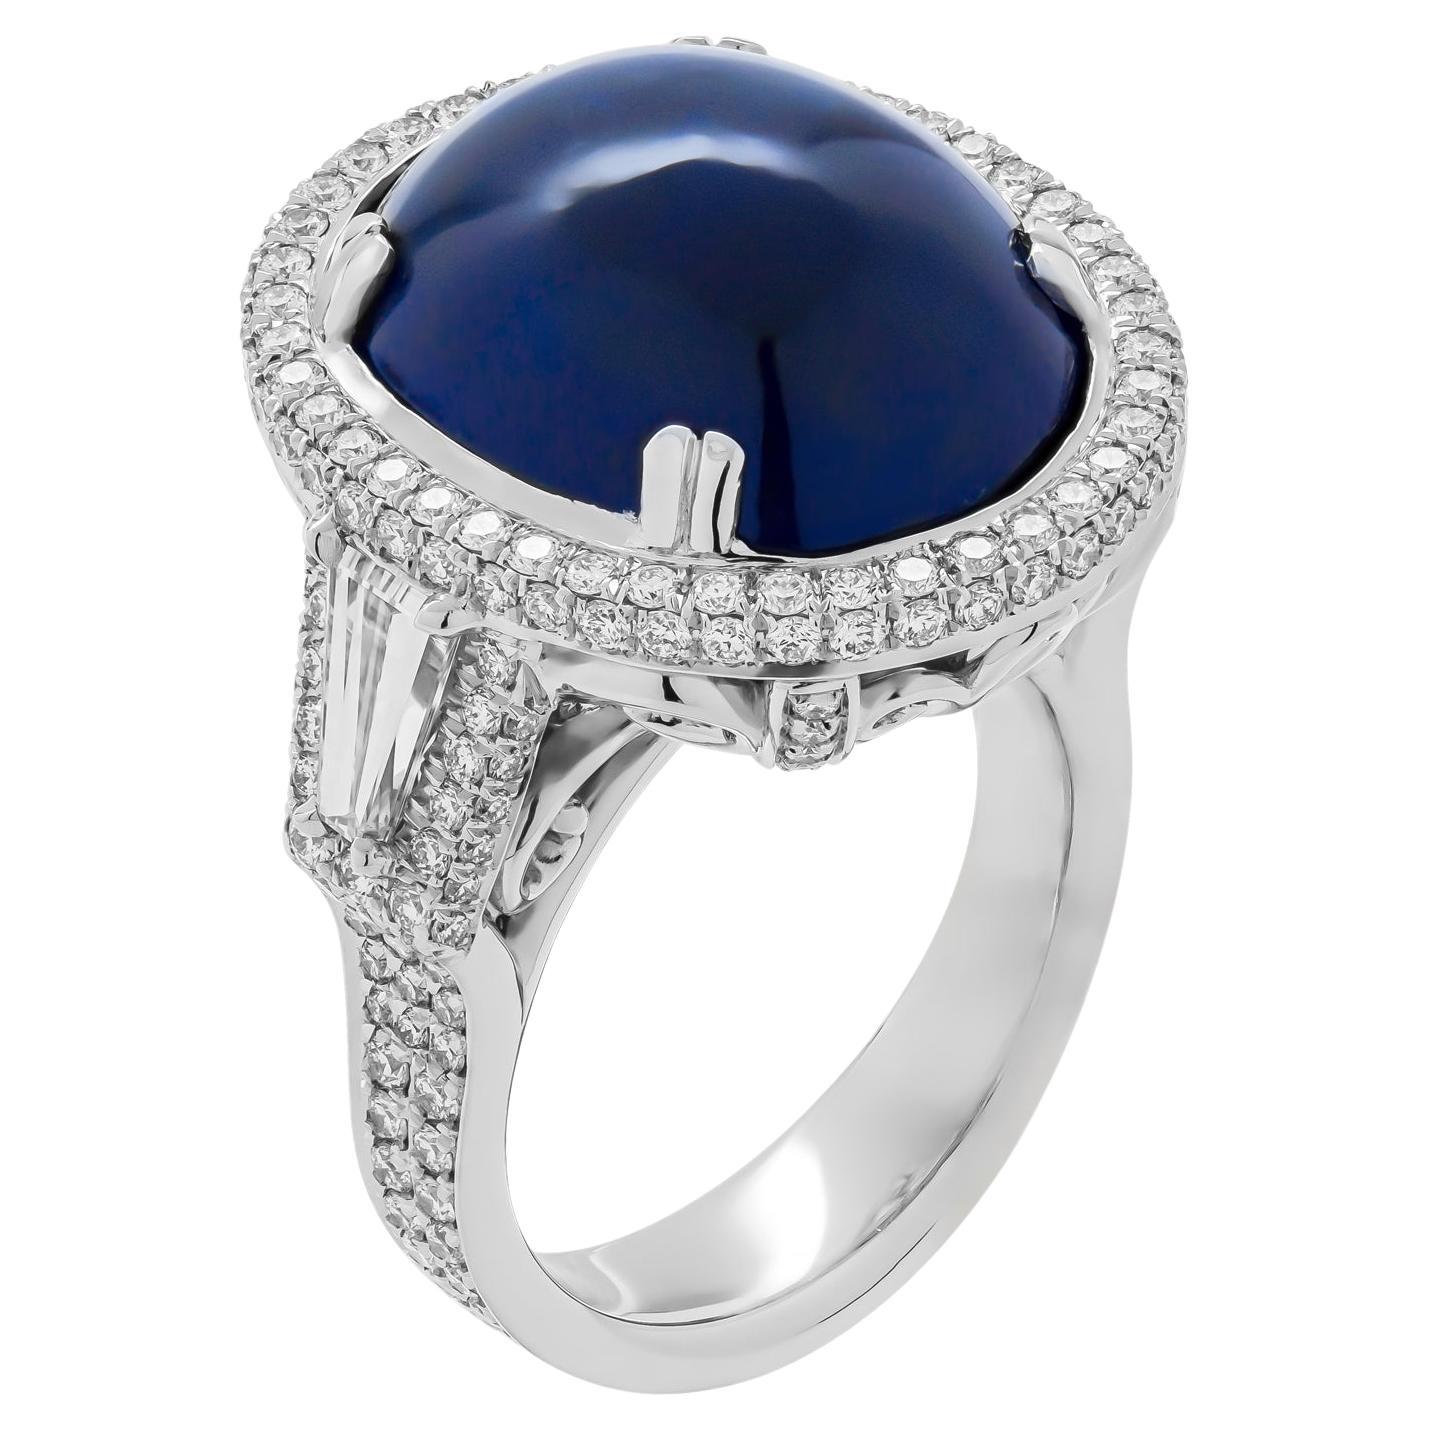 GIA Certified 30.18 Carat Oval Sapphire Cabochon Diamond Cocktail Ring For Sale